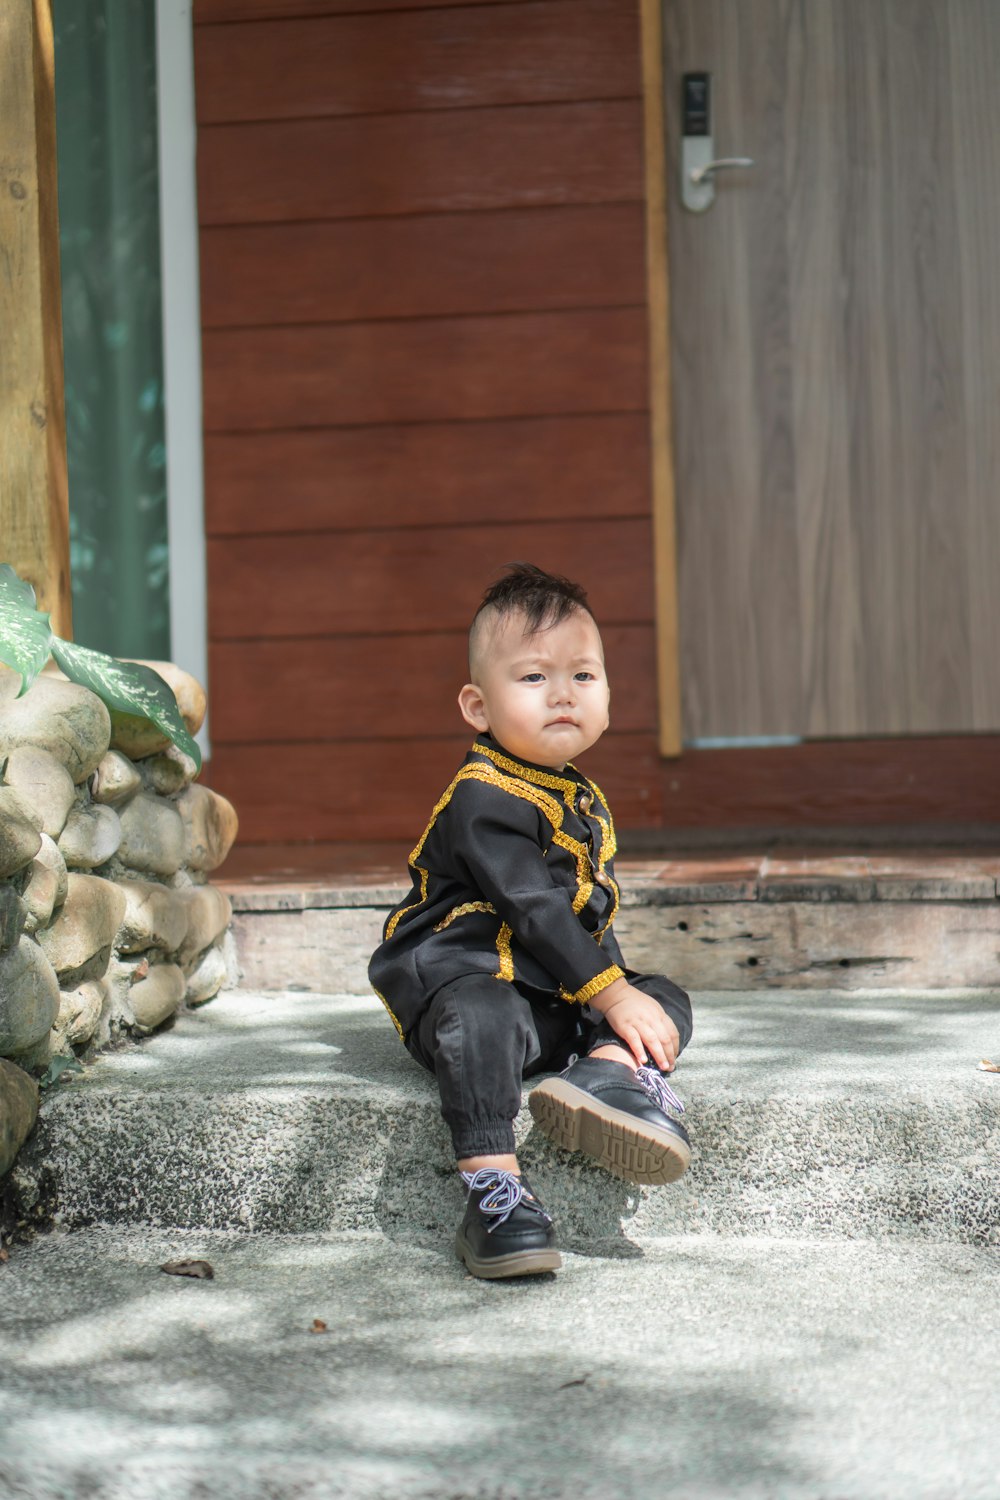 boy in black and yellow jacket sitting on gray concrete floor